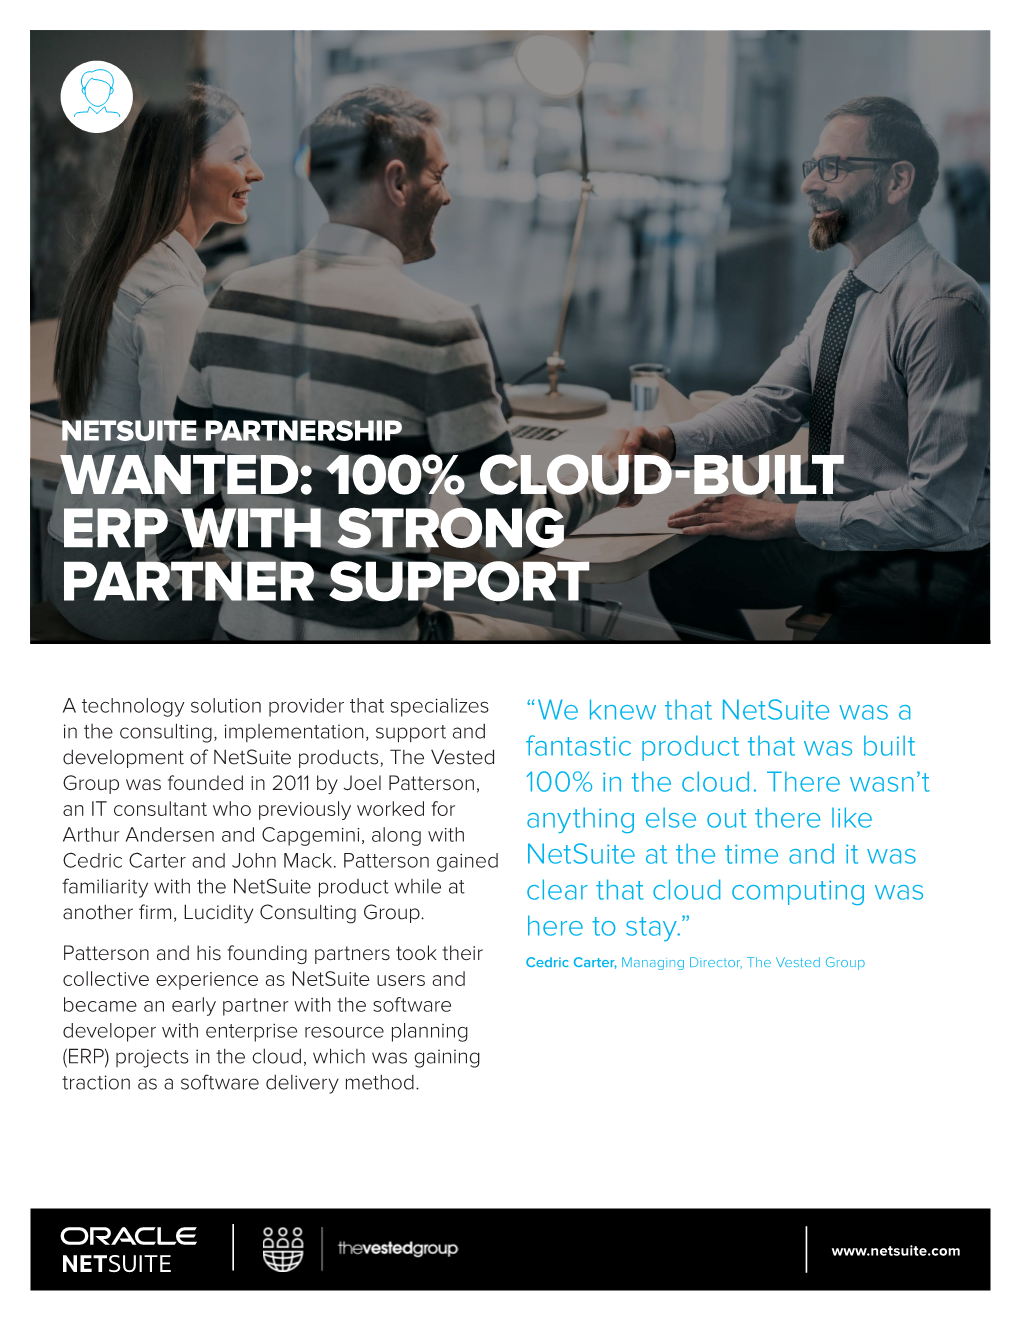 Wanted: 100% Cloud-Built Erp with Strong Partner Support